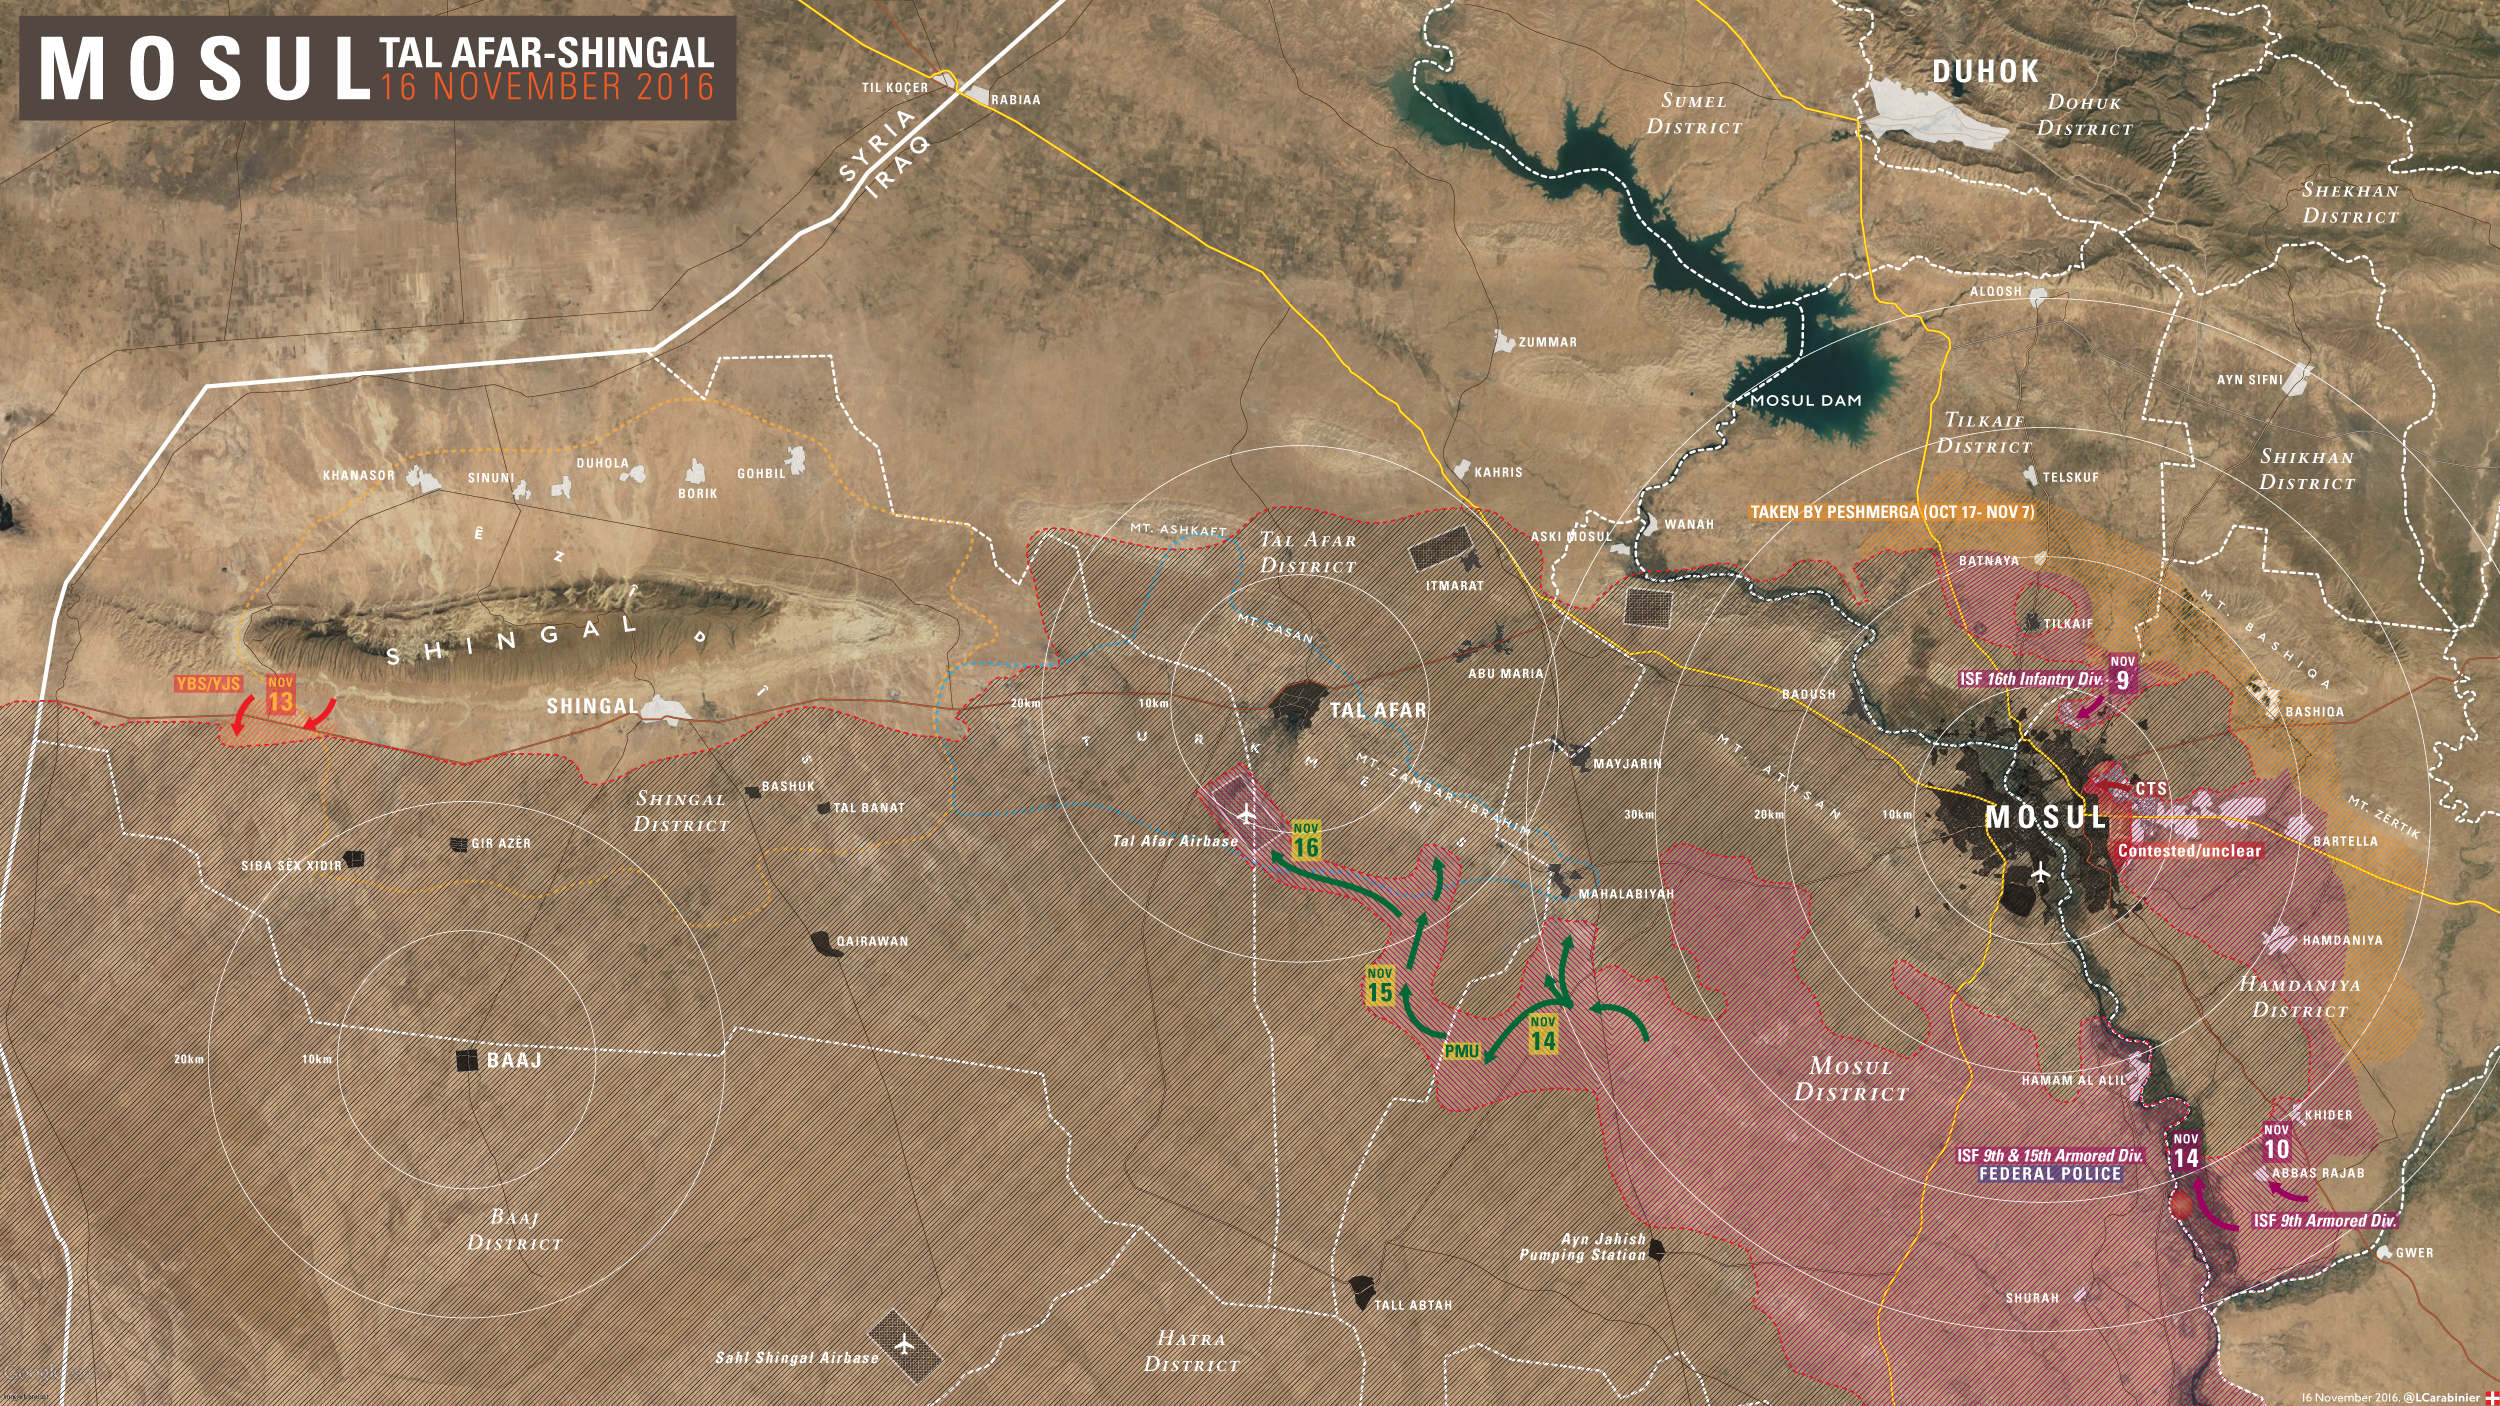 The Stronghold of Mosul